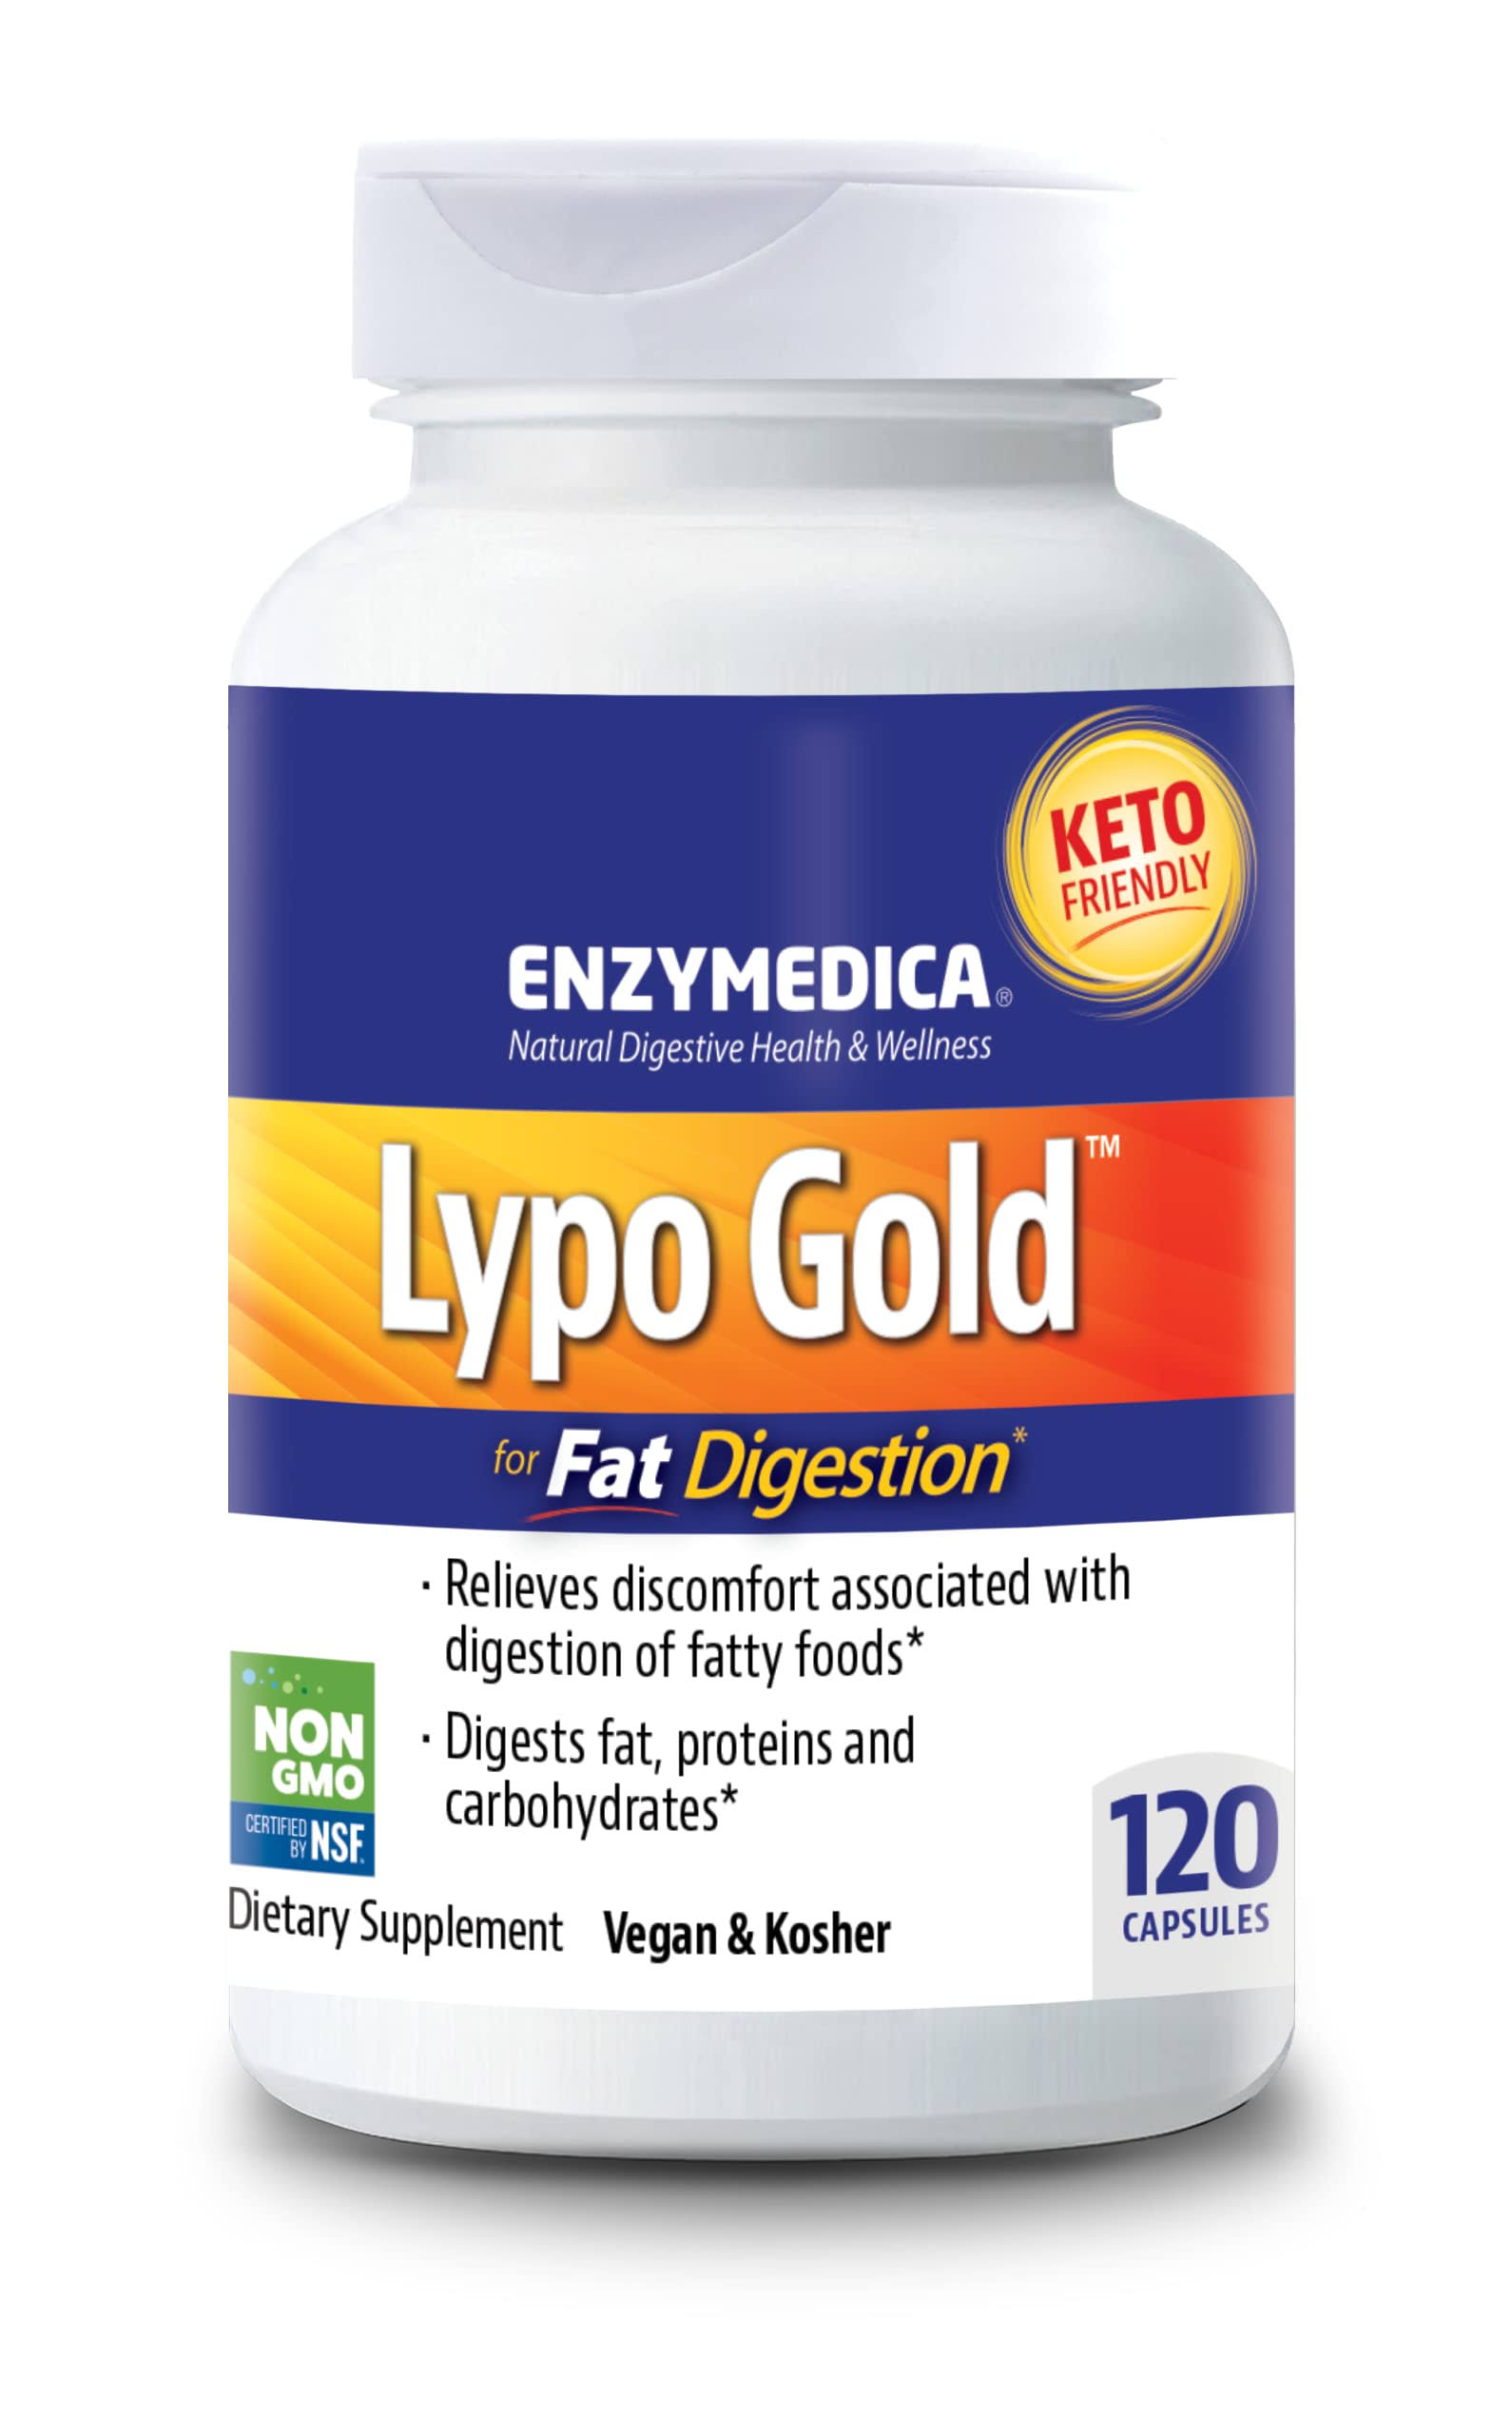 Enzymedica Lypo Gold Fat Digestion Supplement - 120 Capsules